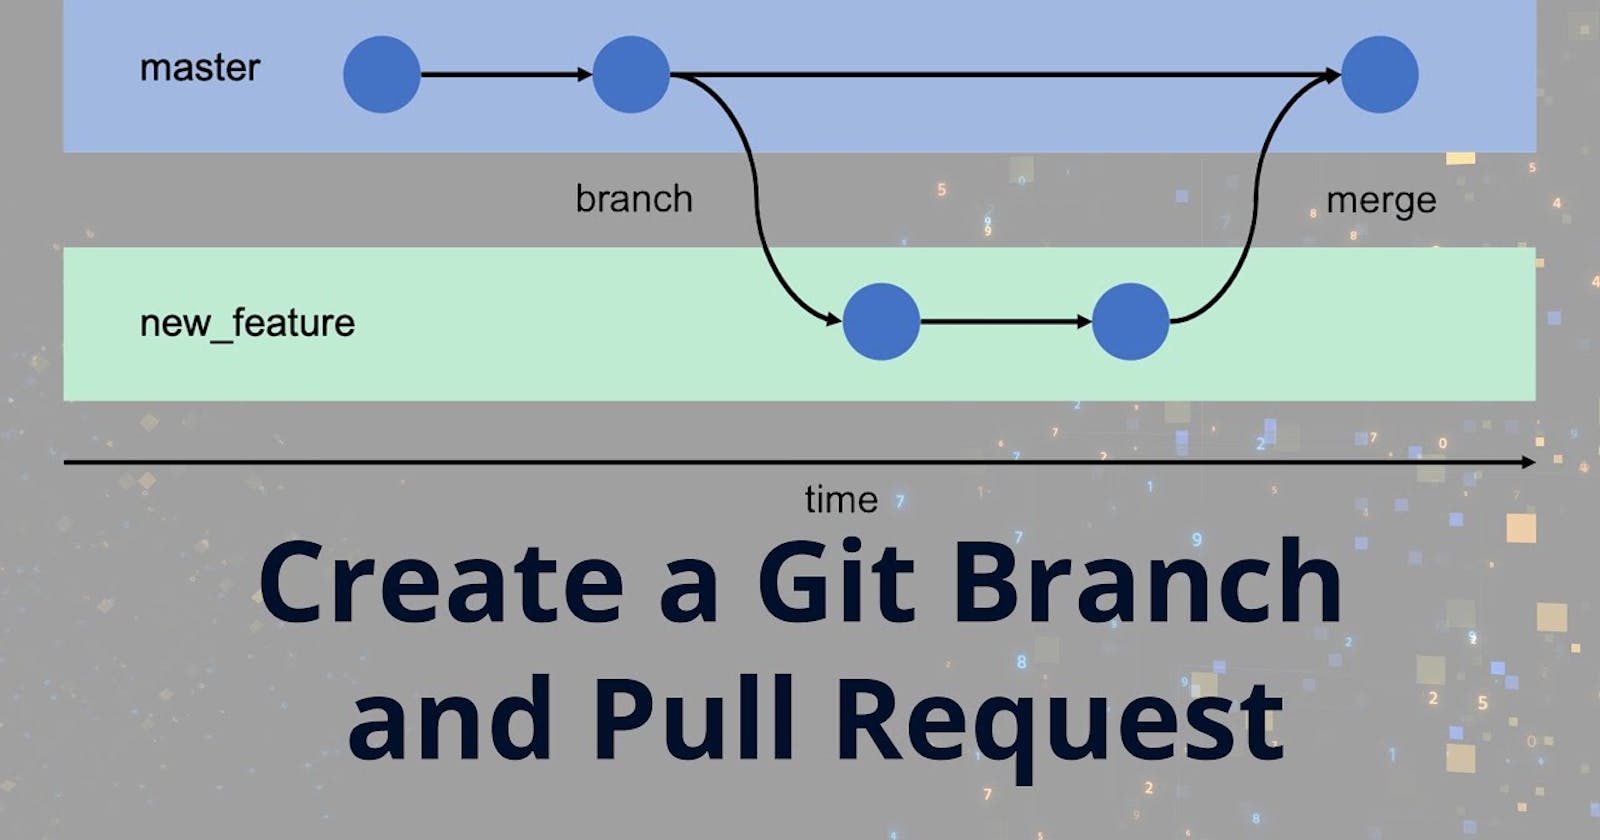 Mastering Branching and Pull Requests in Git